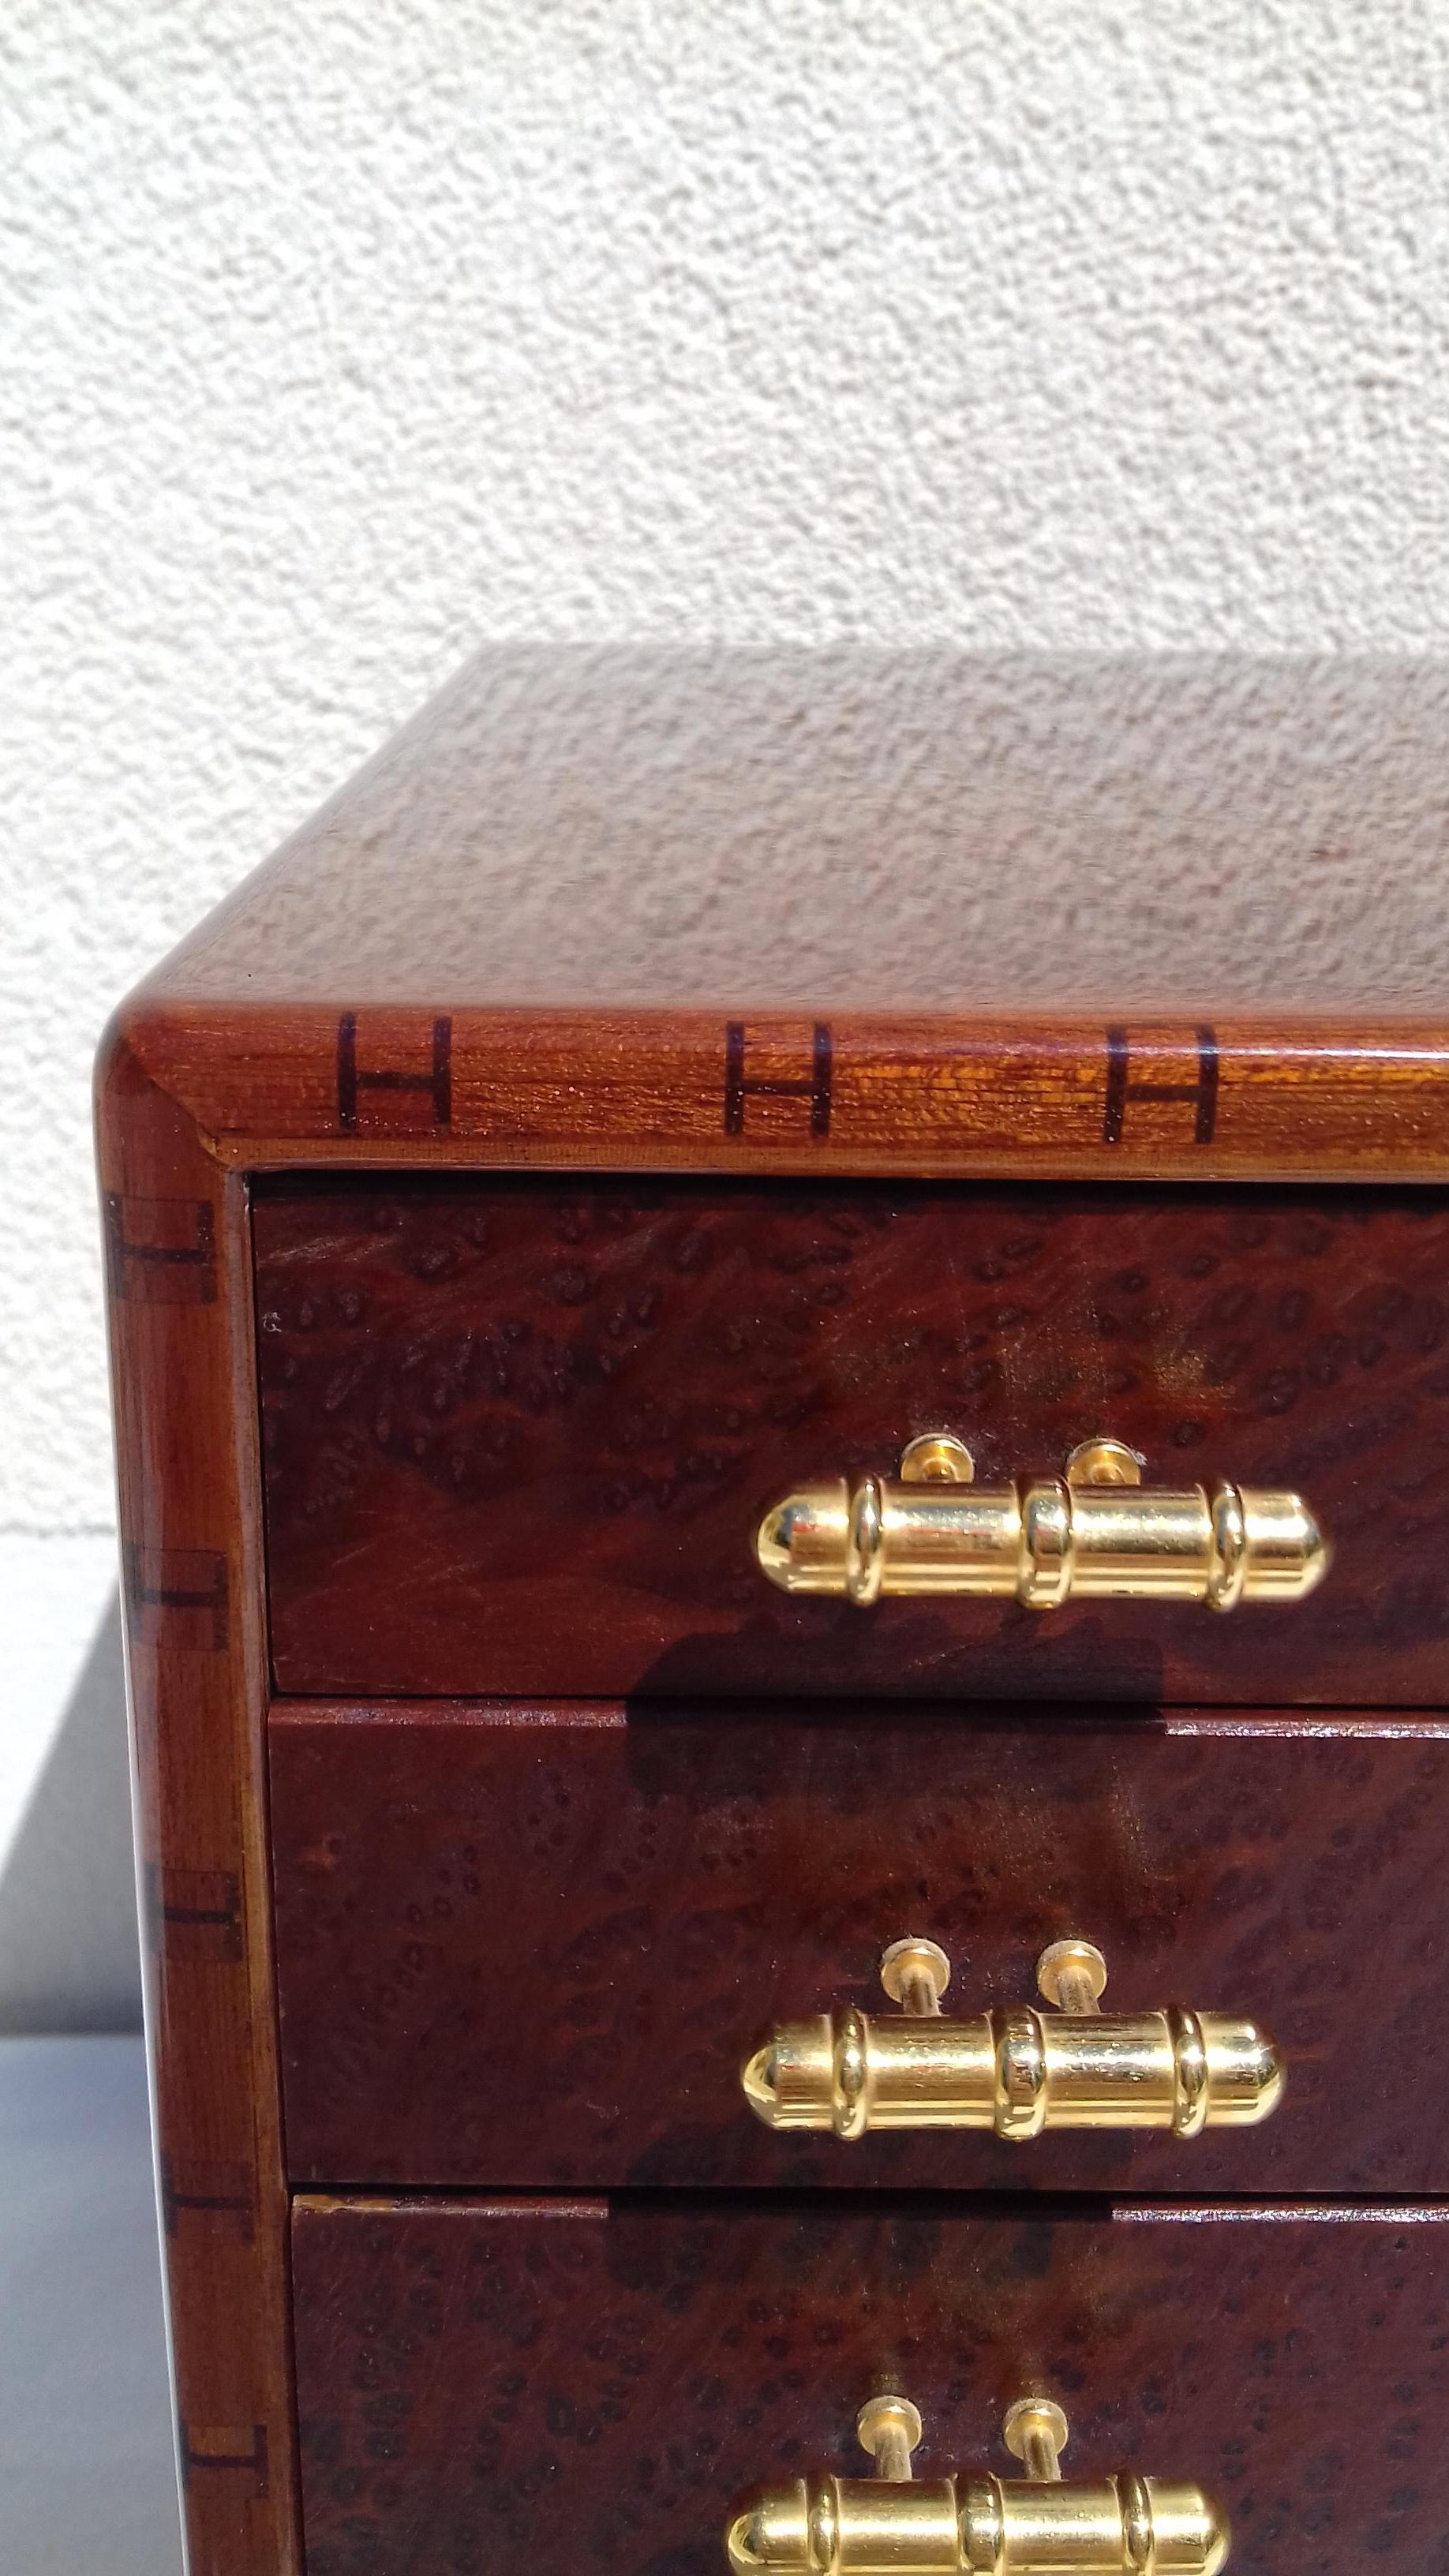 Exceptional Hermès Drawer to store scarves or Jewelry In Wood RARE 2